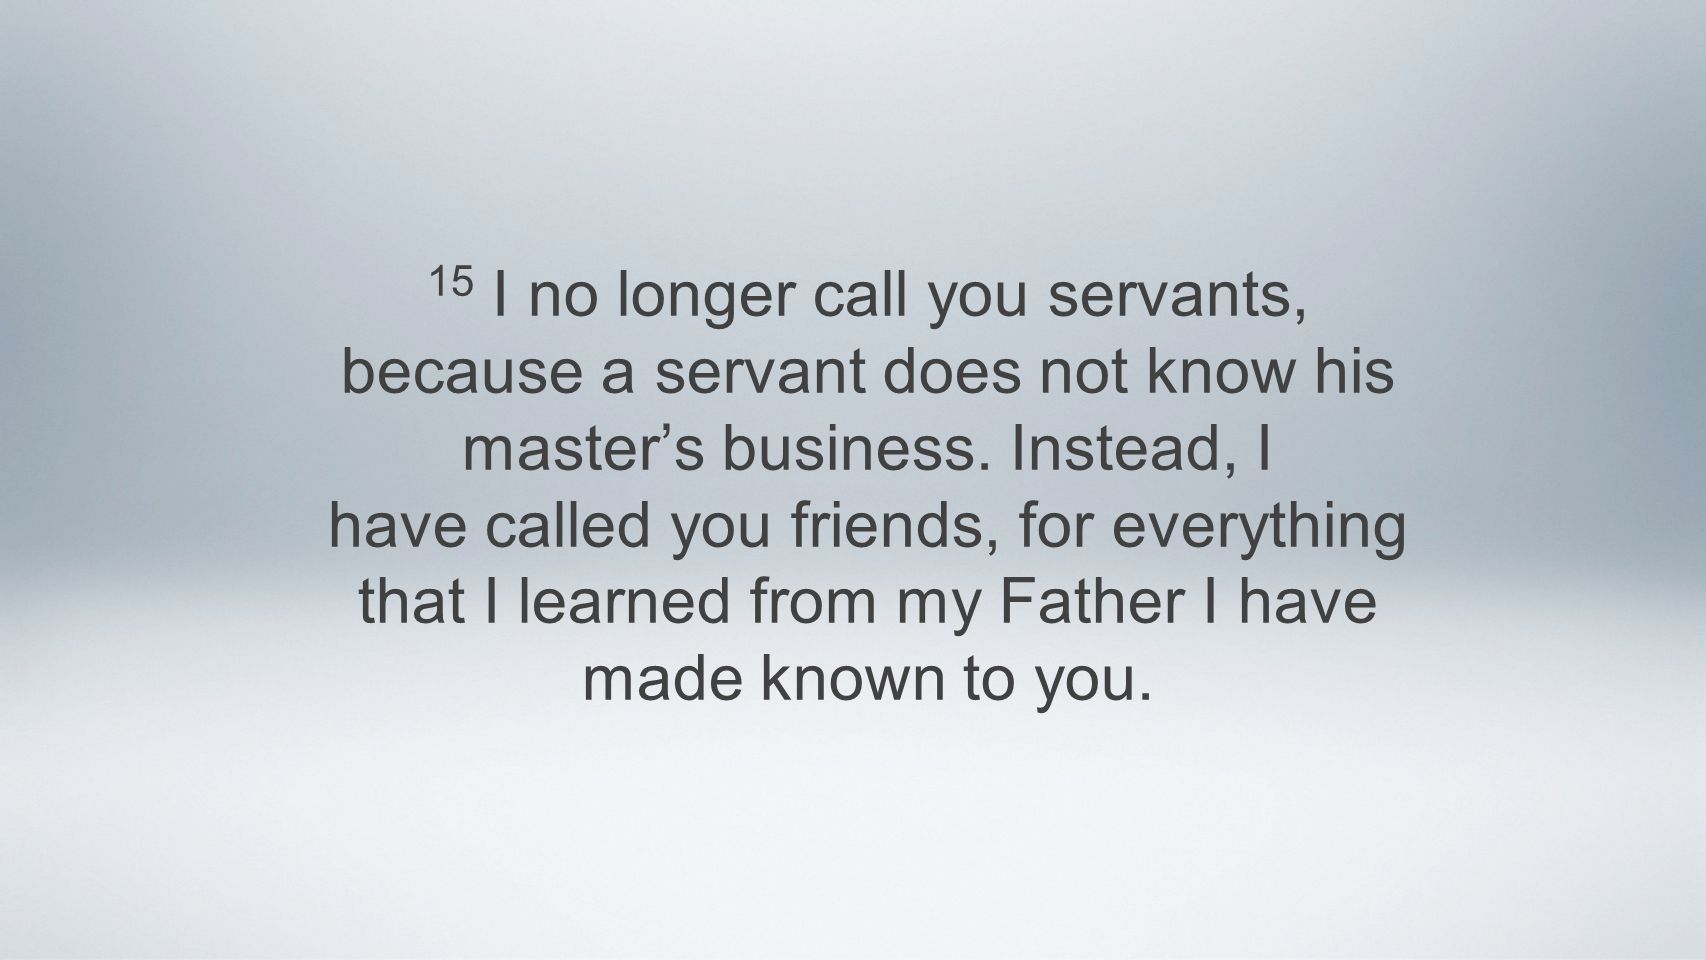 15 I no longer call you servants, because a servant does not know his master’s business.